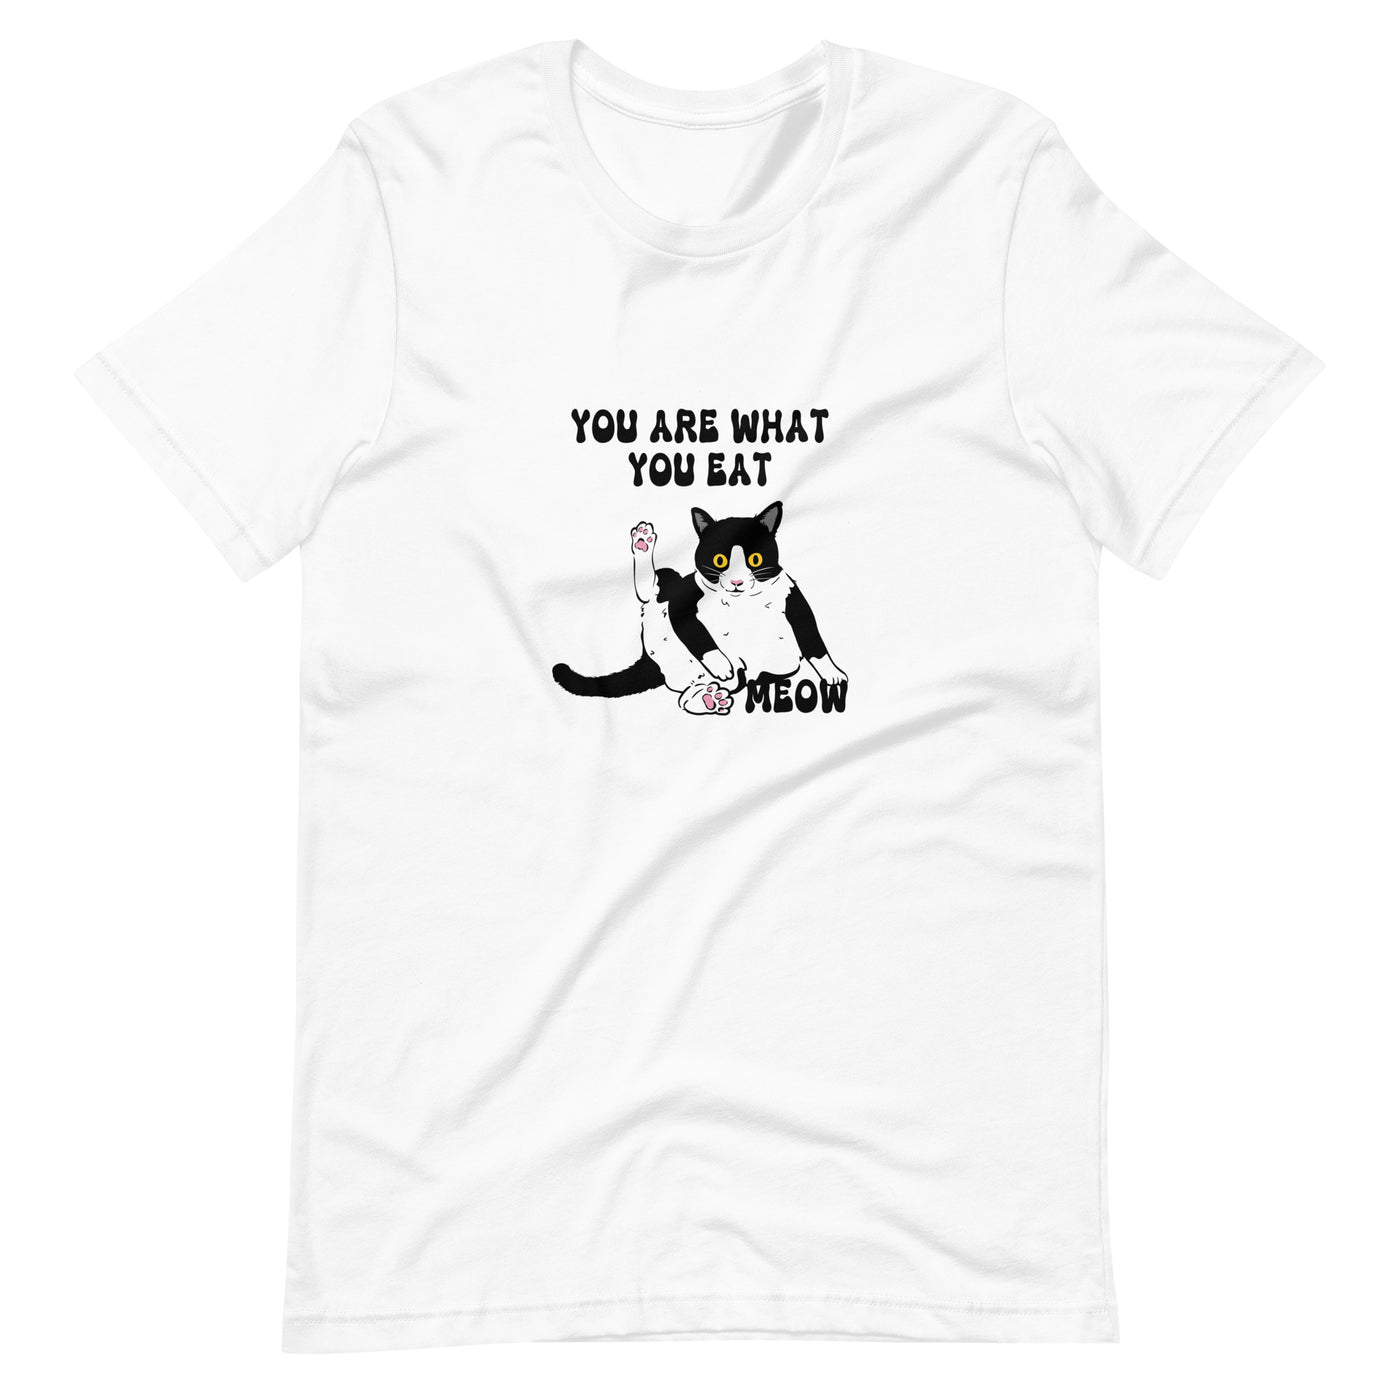 Pride Clothes - Eat Your Heart Out You Are What You Eat Meow T-Shirt - White